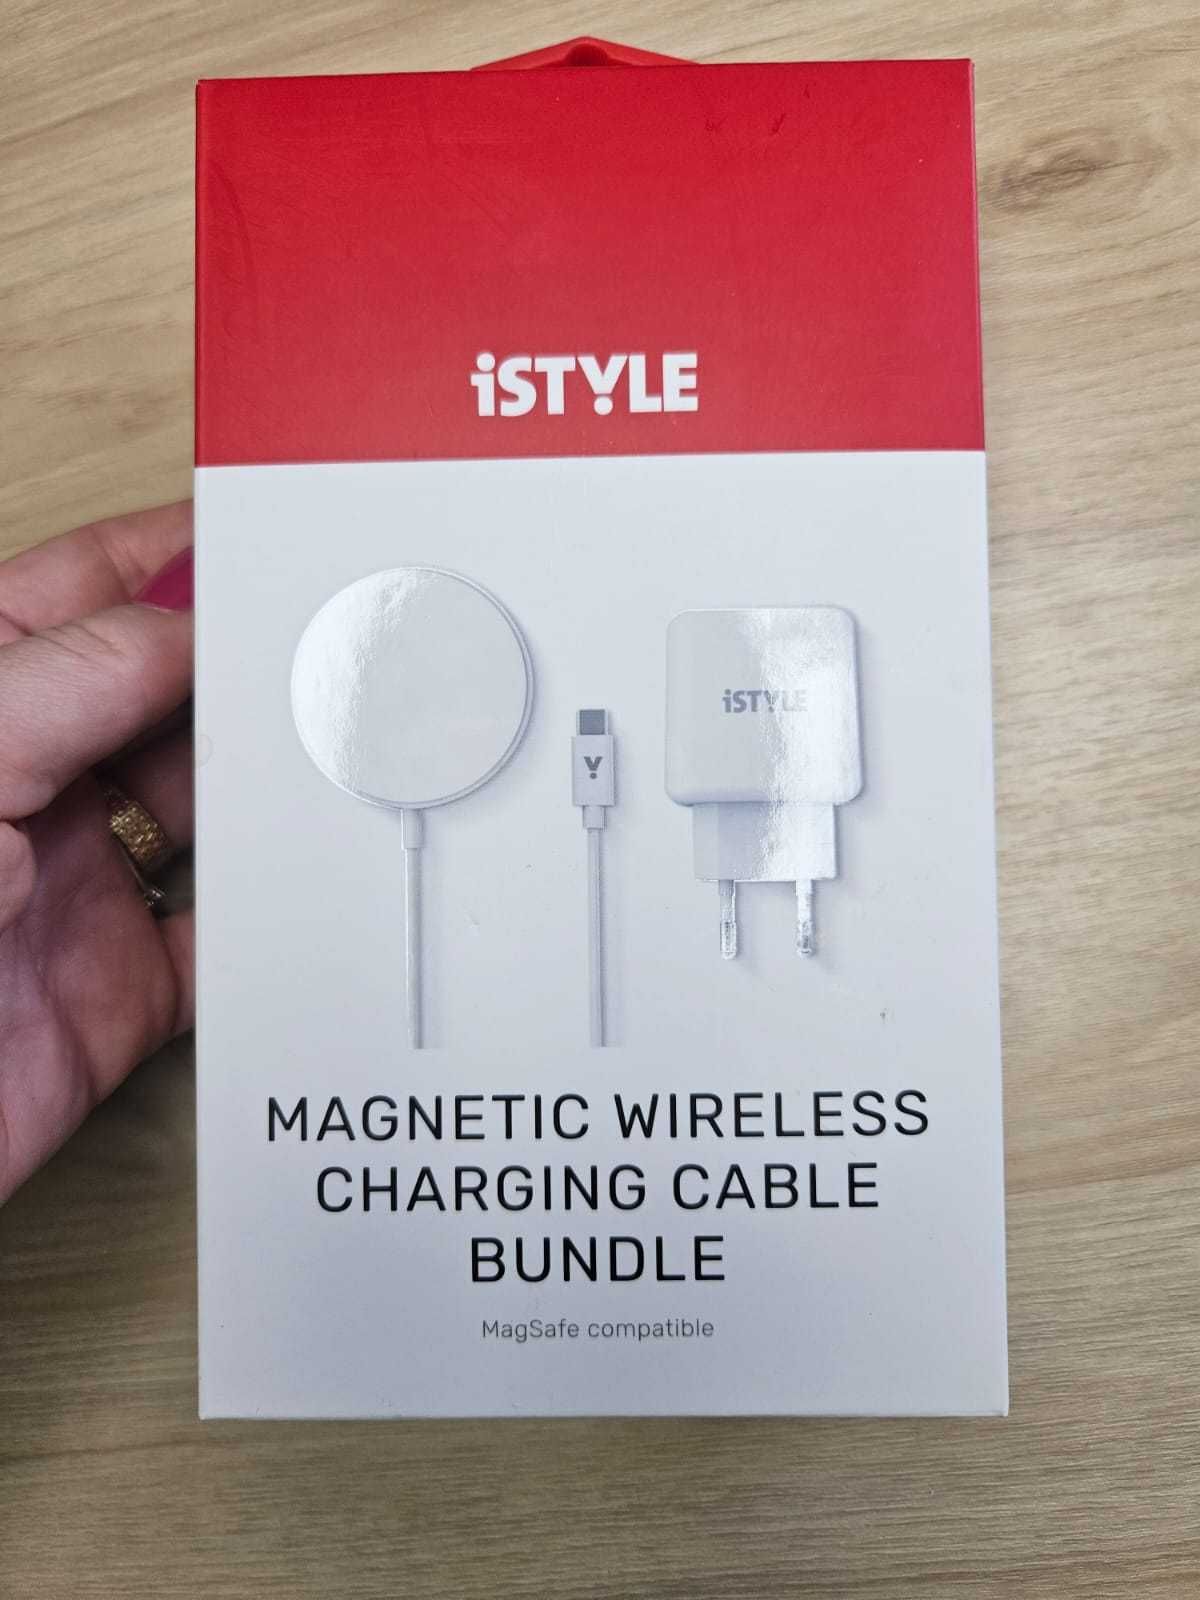 NOU - iStyle Magnetic Wireless Charging Cable - 150 lei